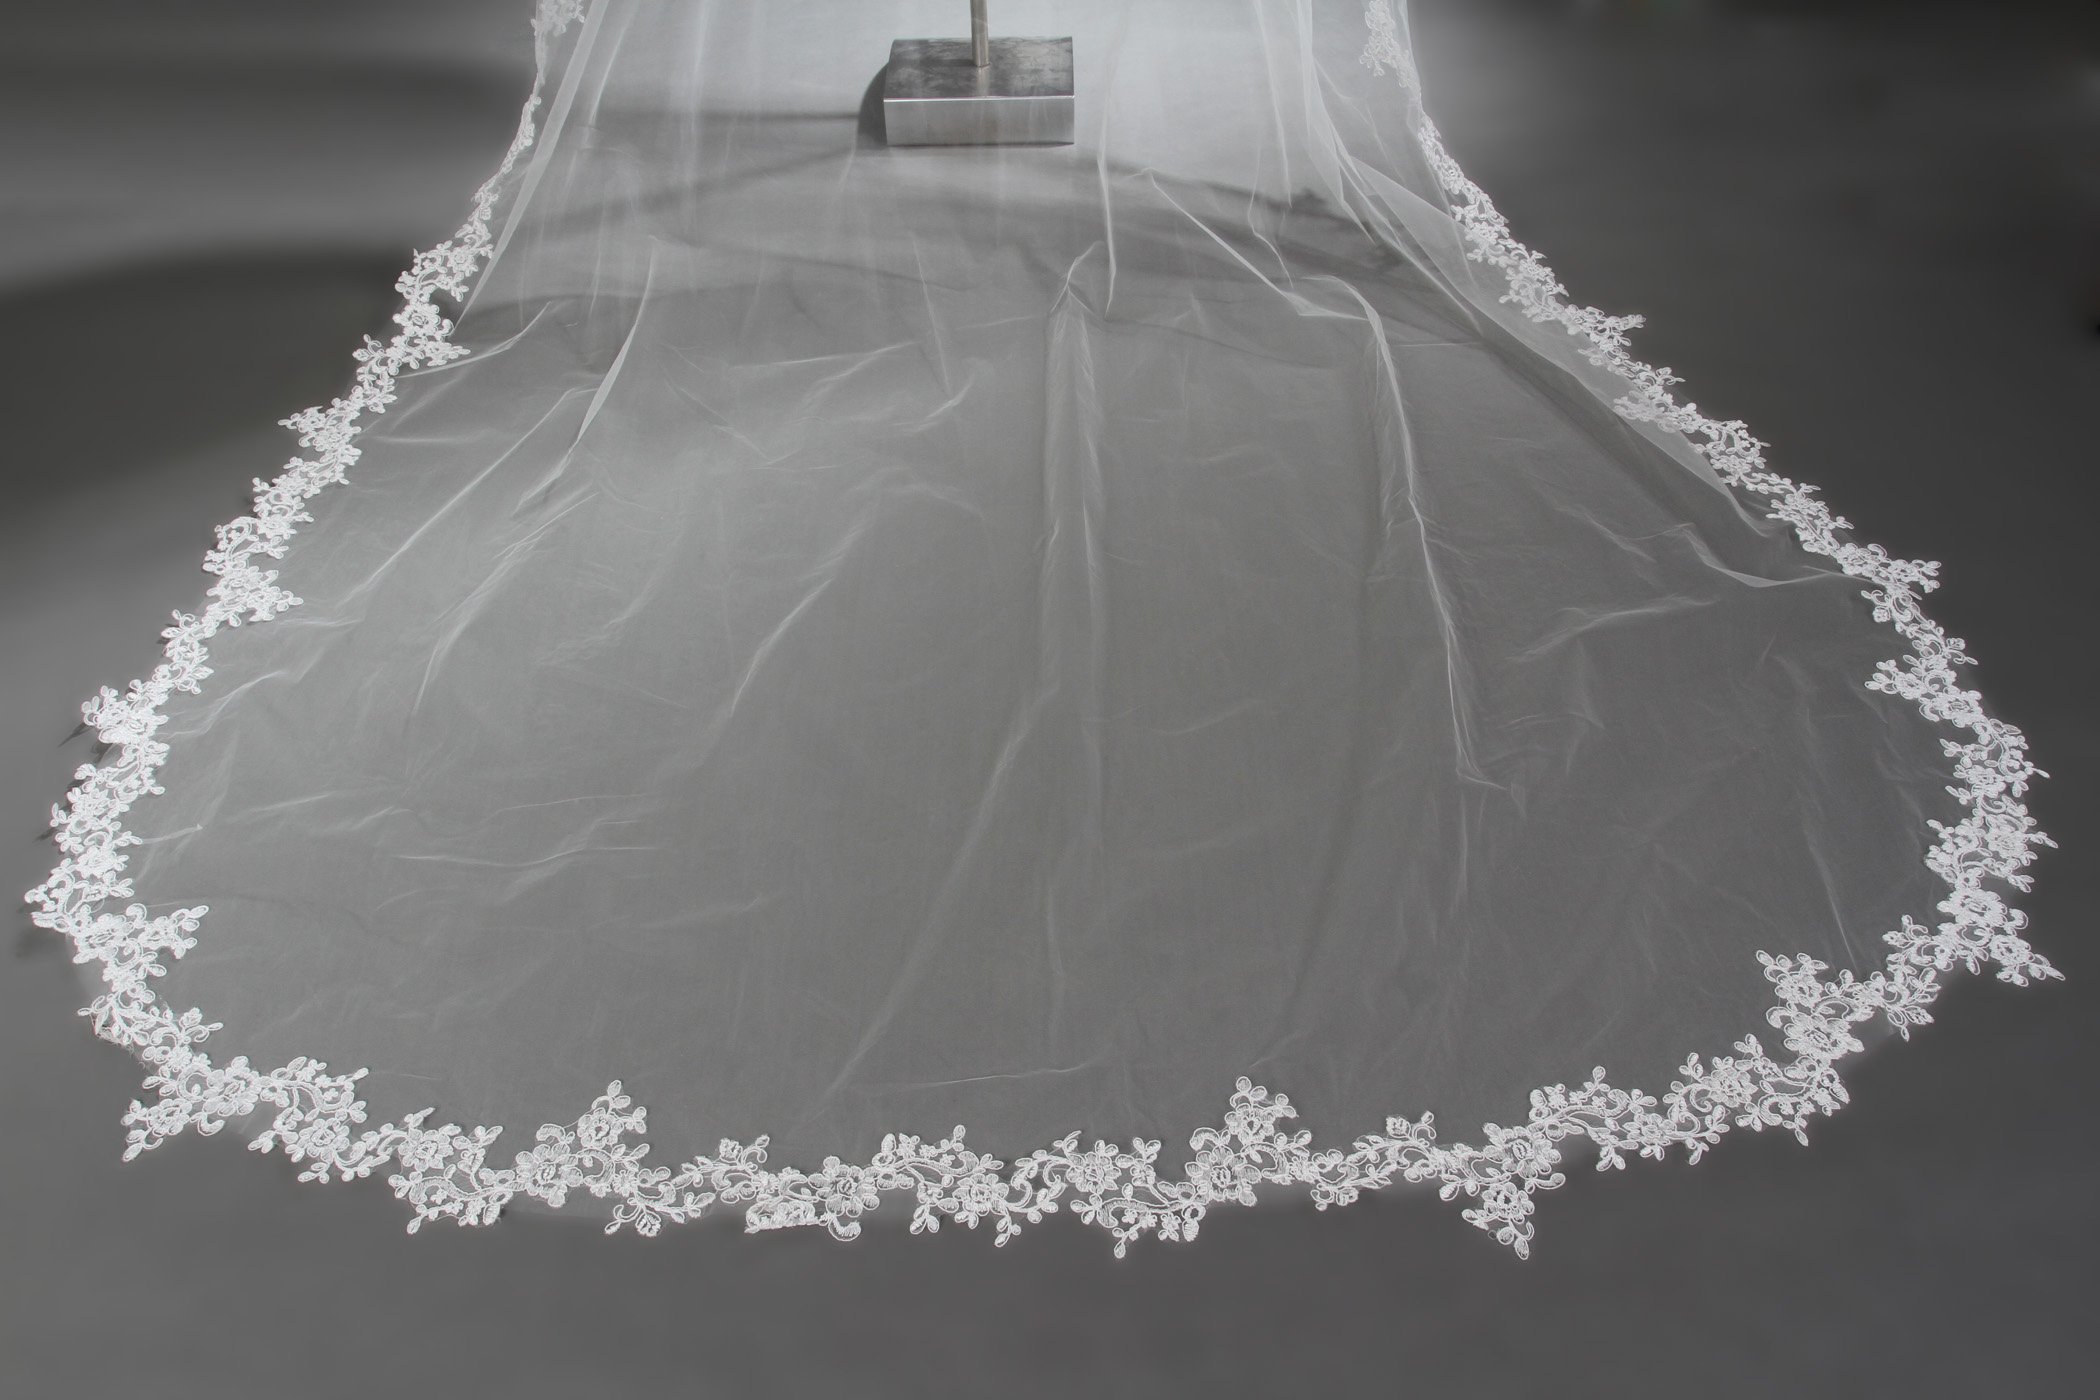 Wedding Veil One-tier Cathedral Veils Lace Applique Edge Tulle Lace